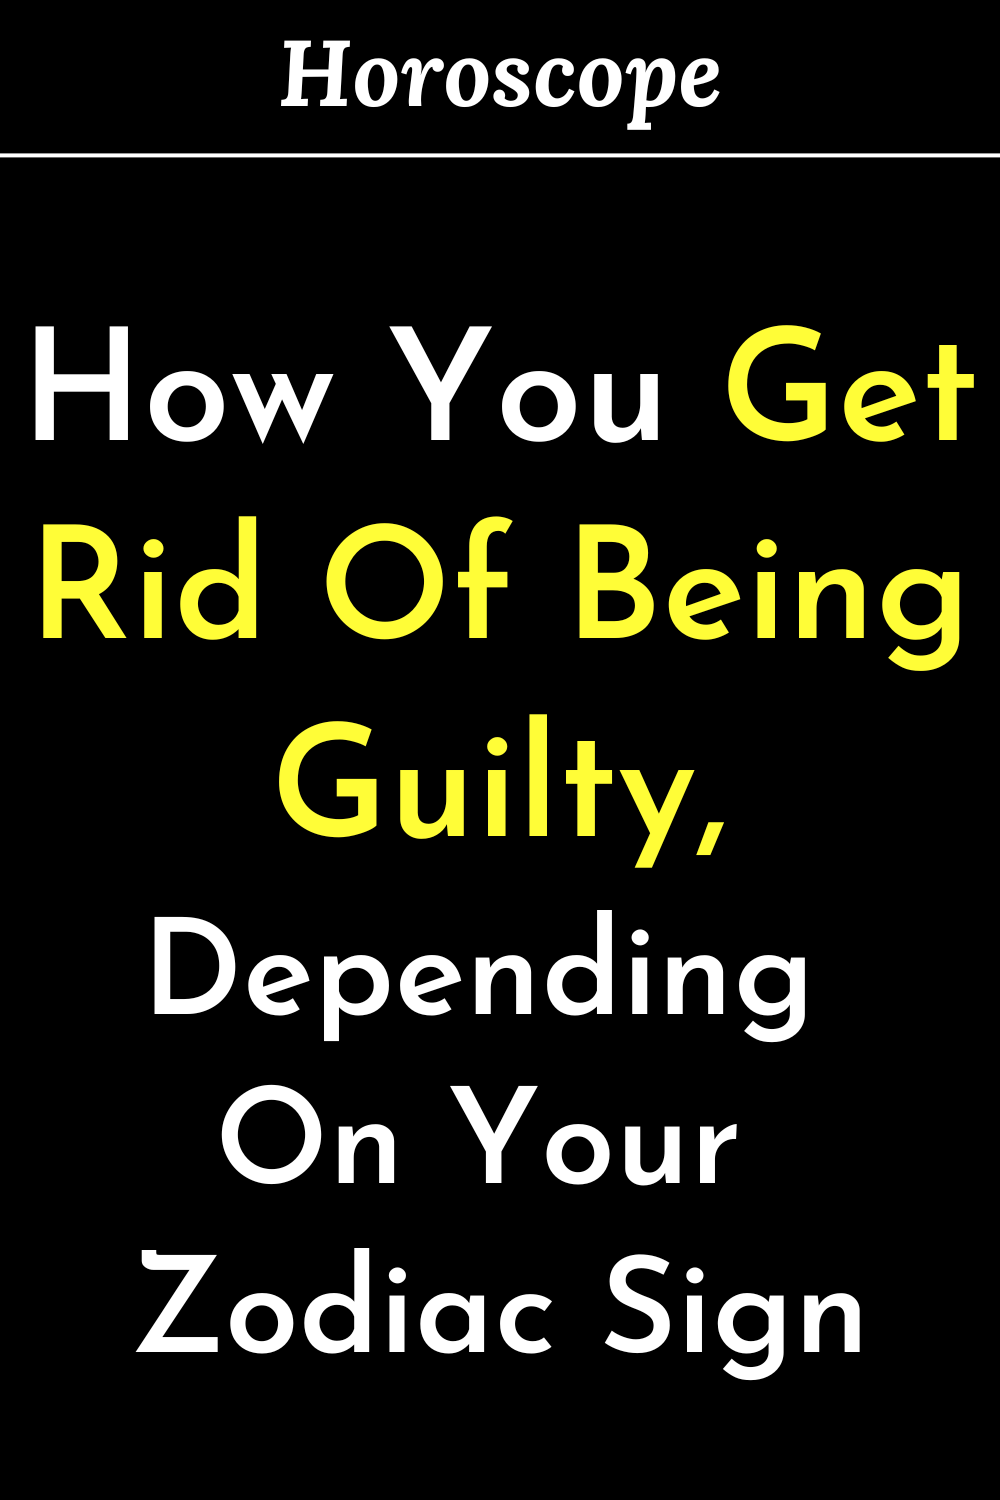 How You Get Rid Of Being Guilty, Depending On Your Zodiac Sign